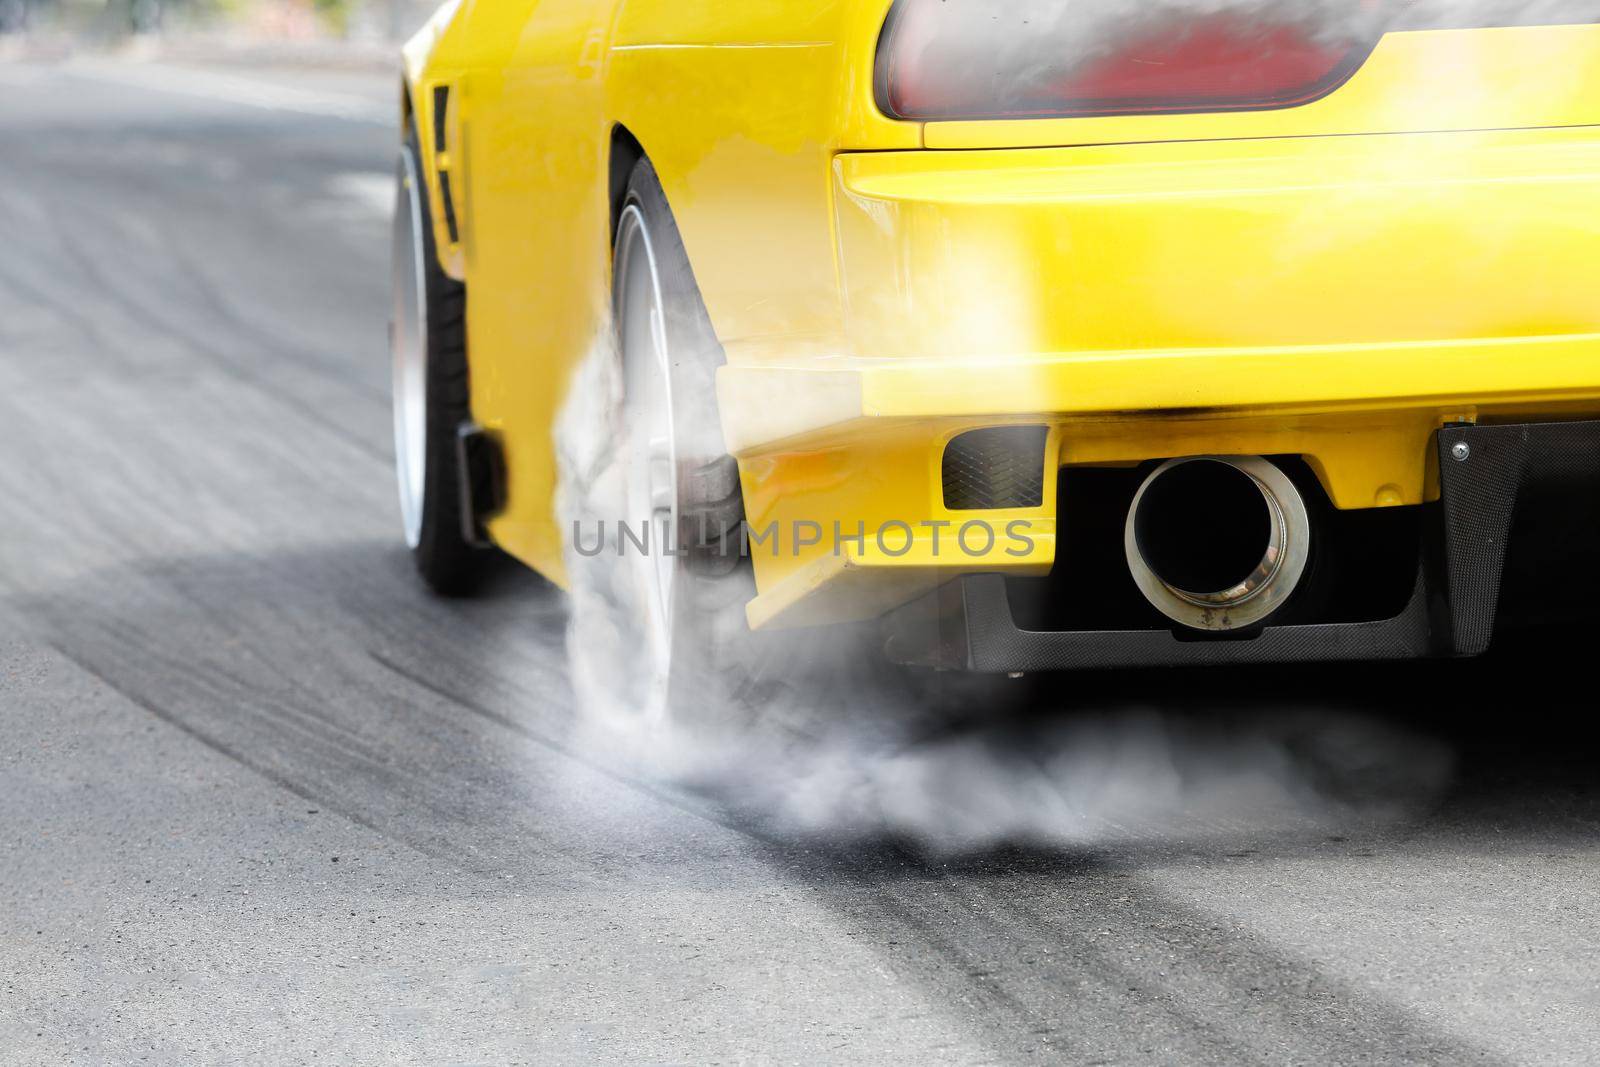 race car burns rubber off its tires in preparation for the race by toa55